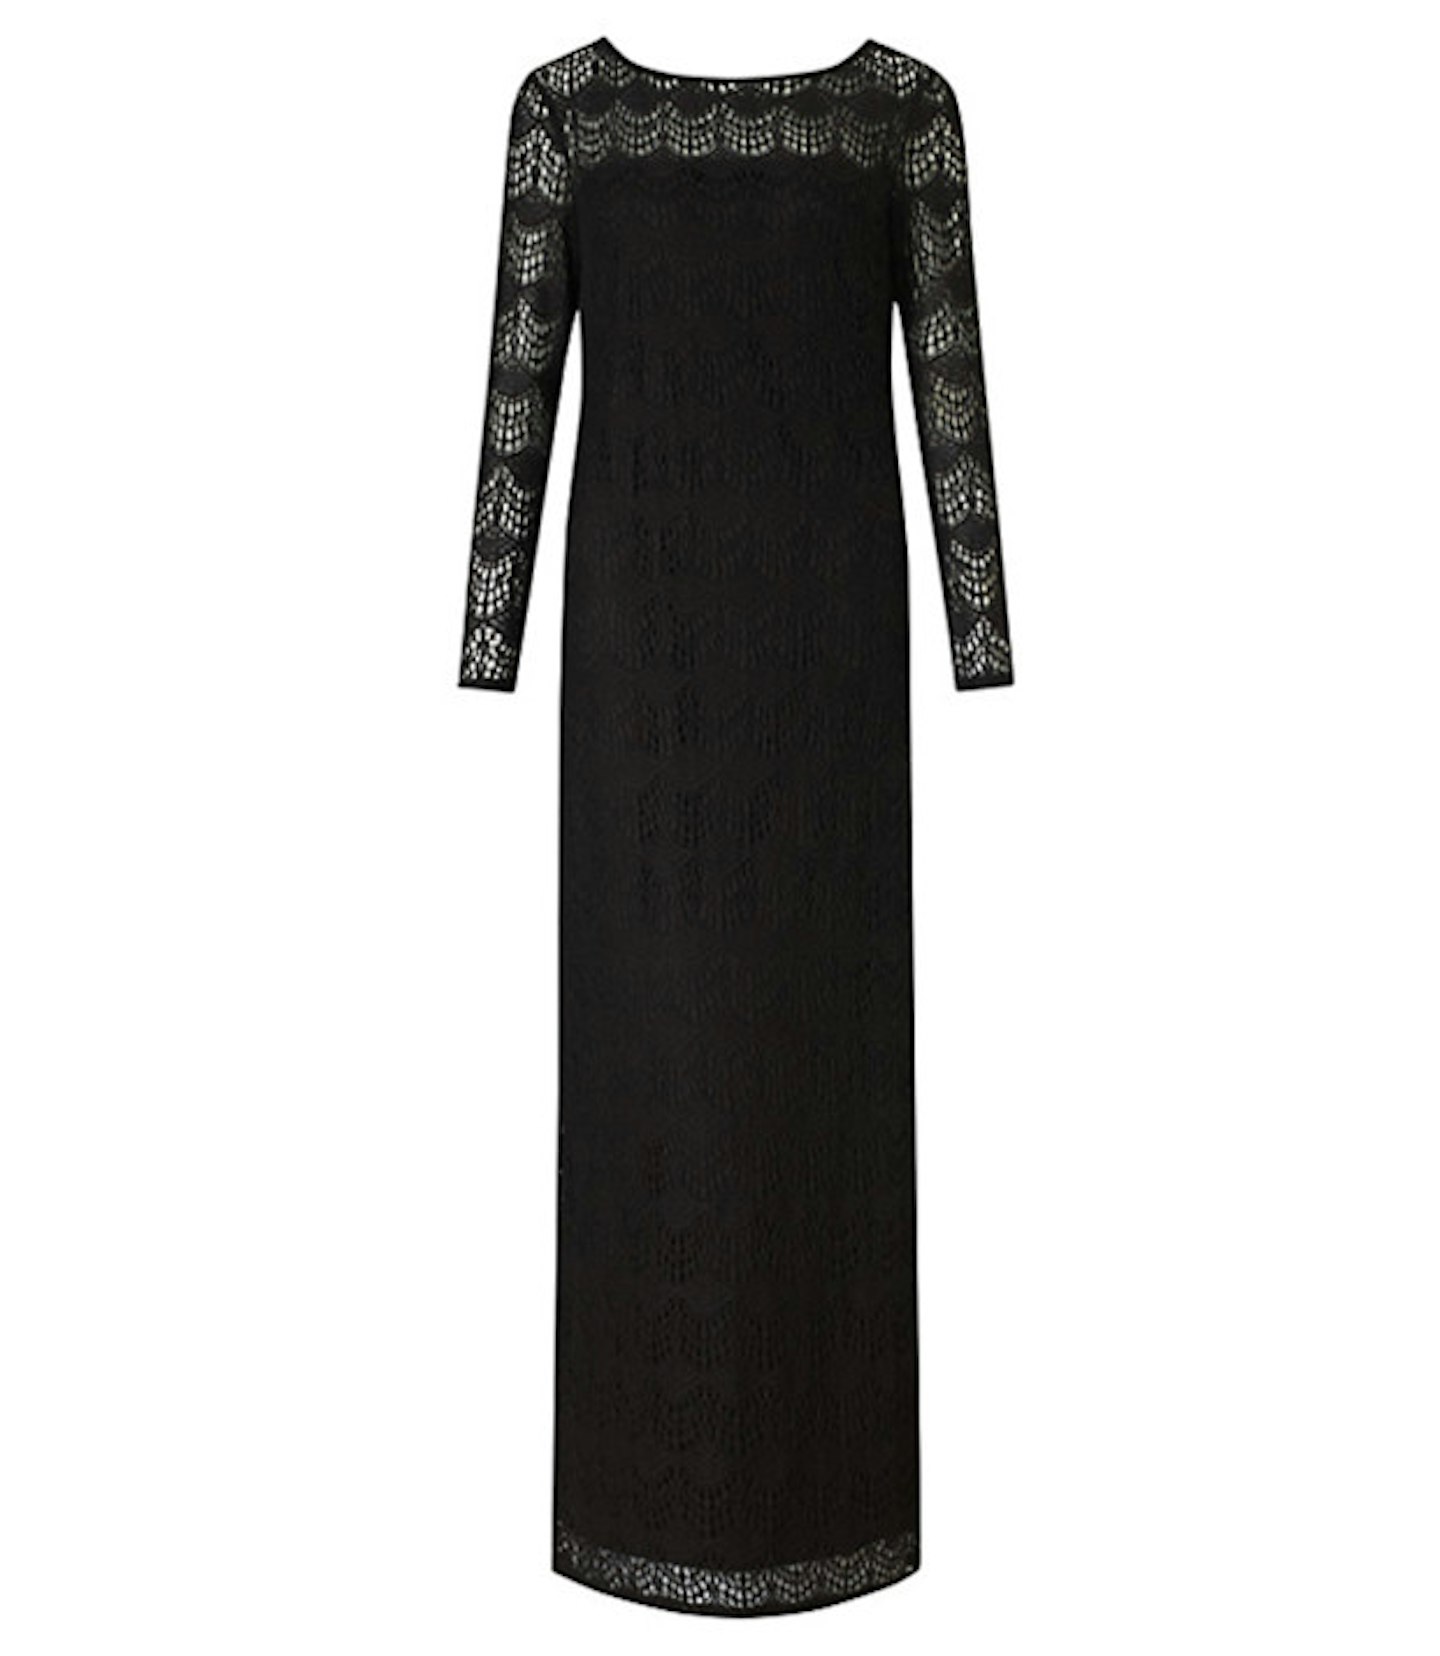 Somerset by Alice Temperley £150